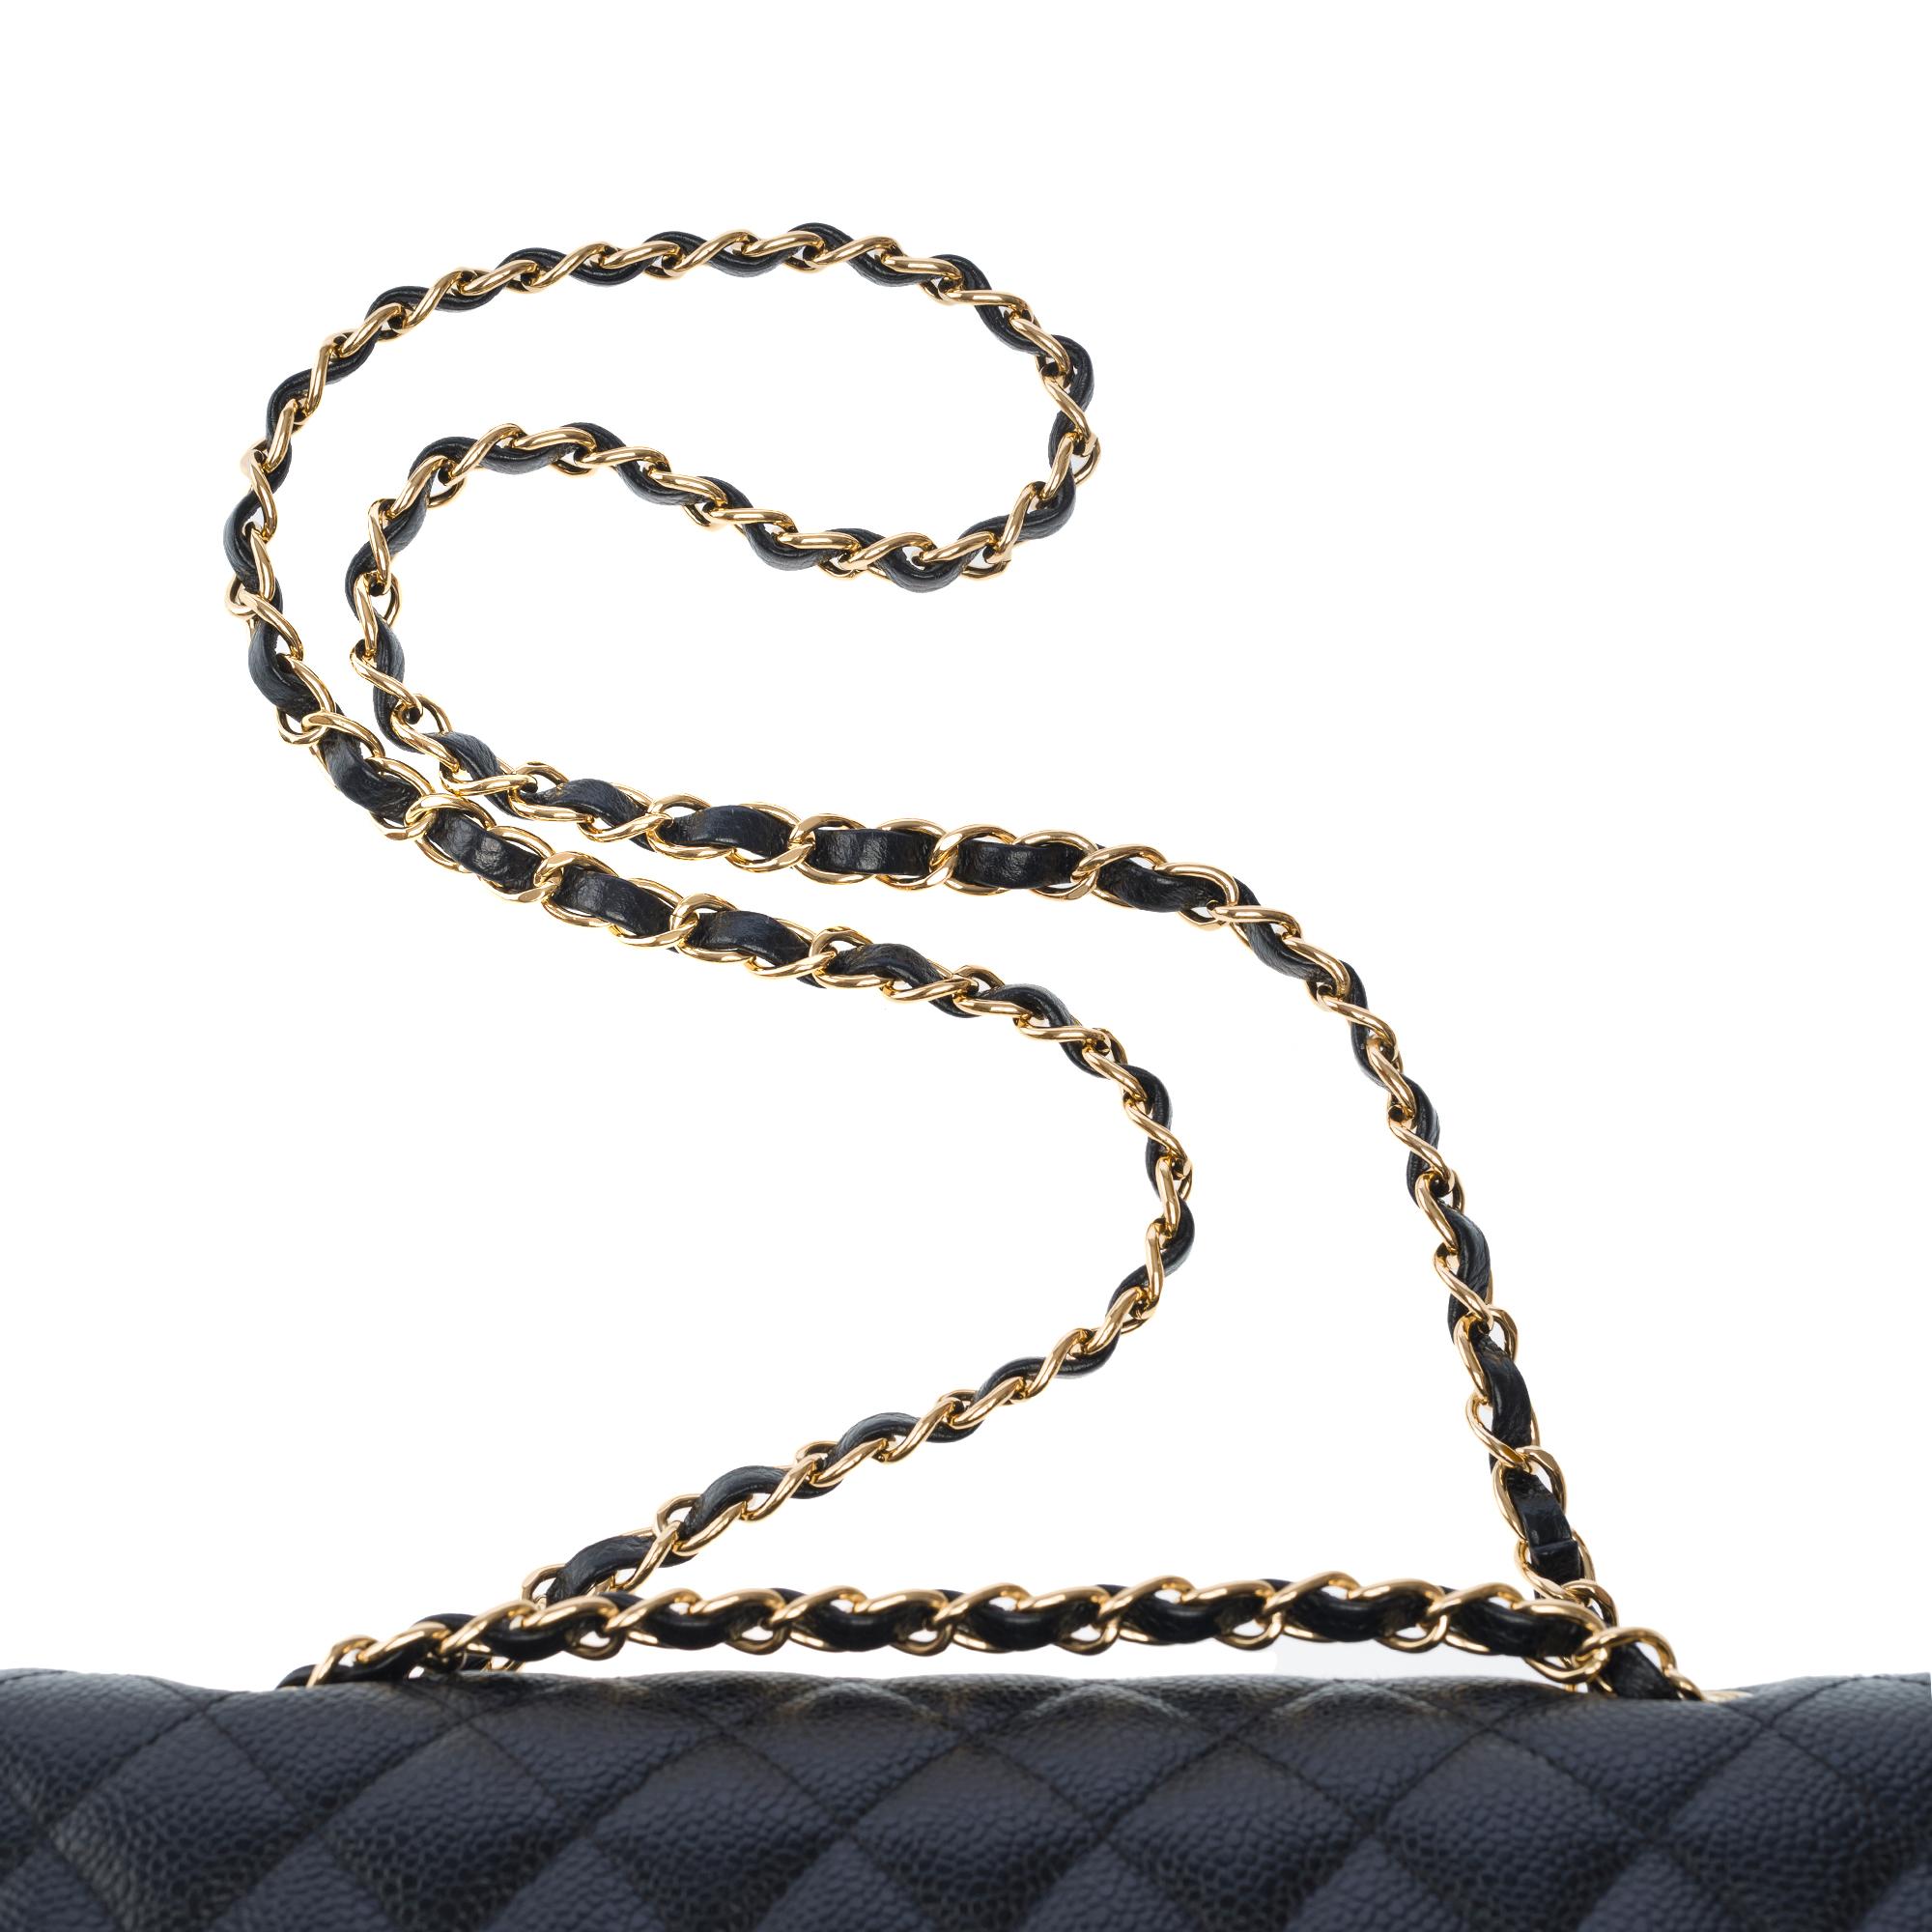 Chanel Timeless double flap shoulder bag in Black Quilted Caviar leather, GHW 6